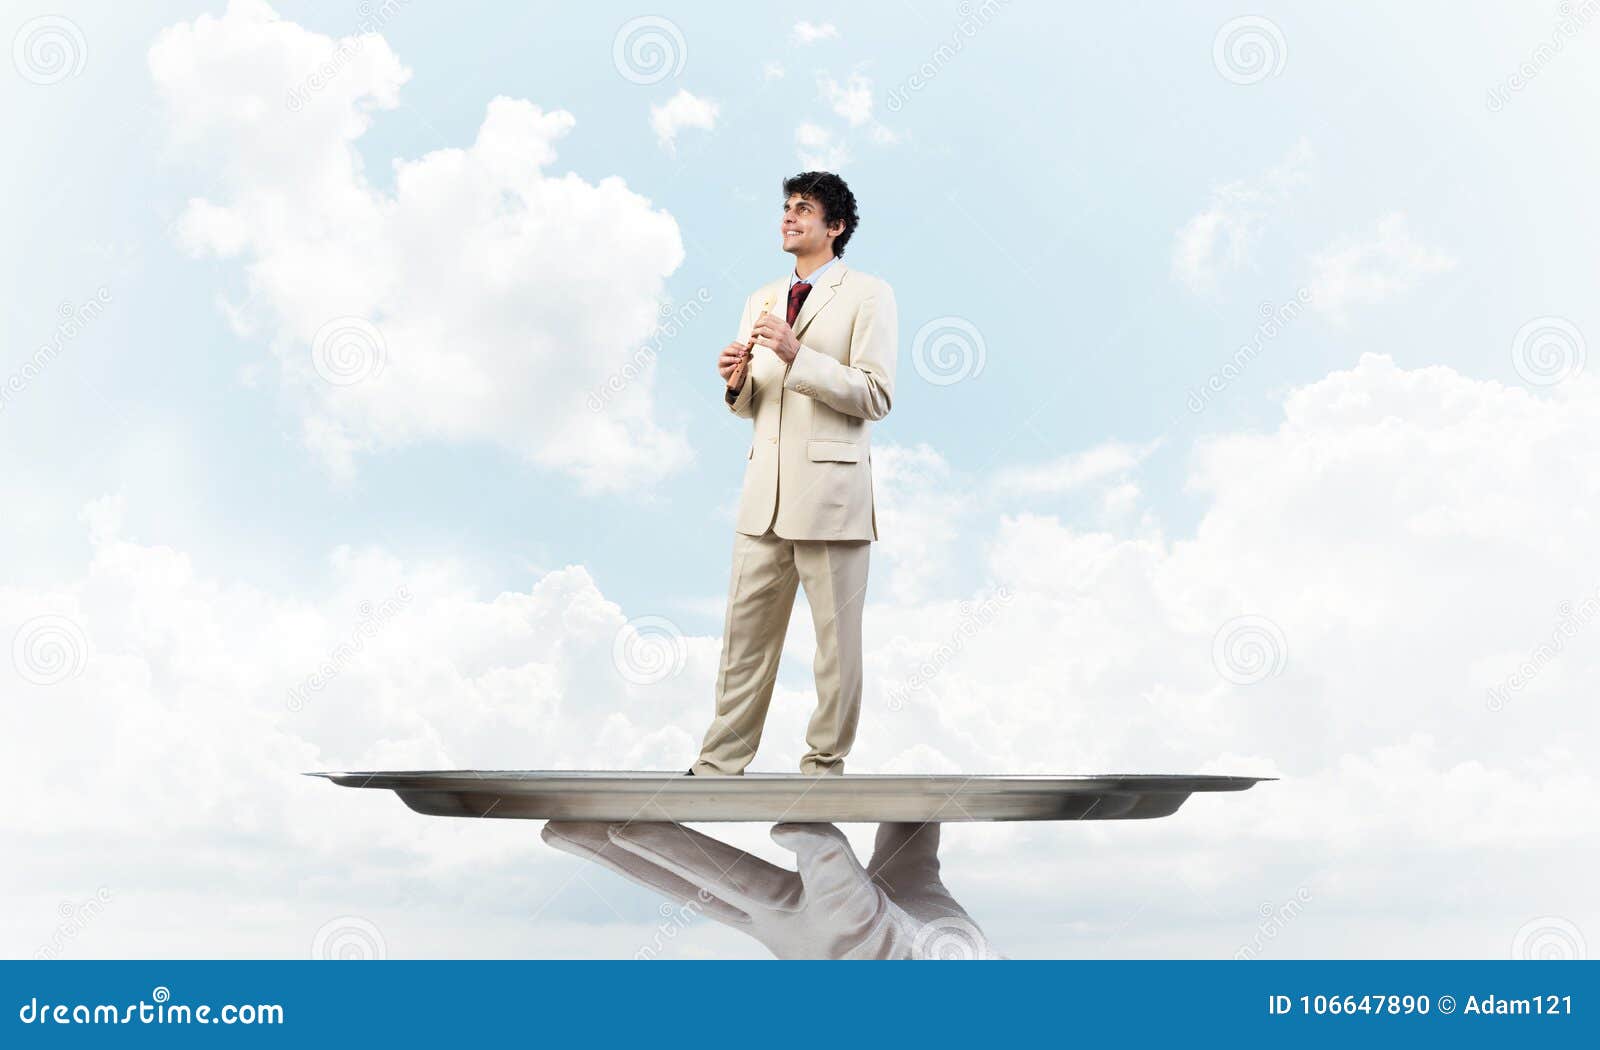 Businessman On Metal Tray Playing Fife Against Blue Sky Background